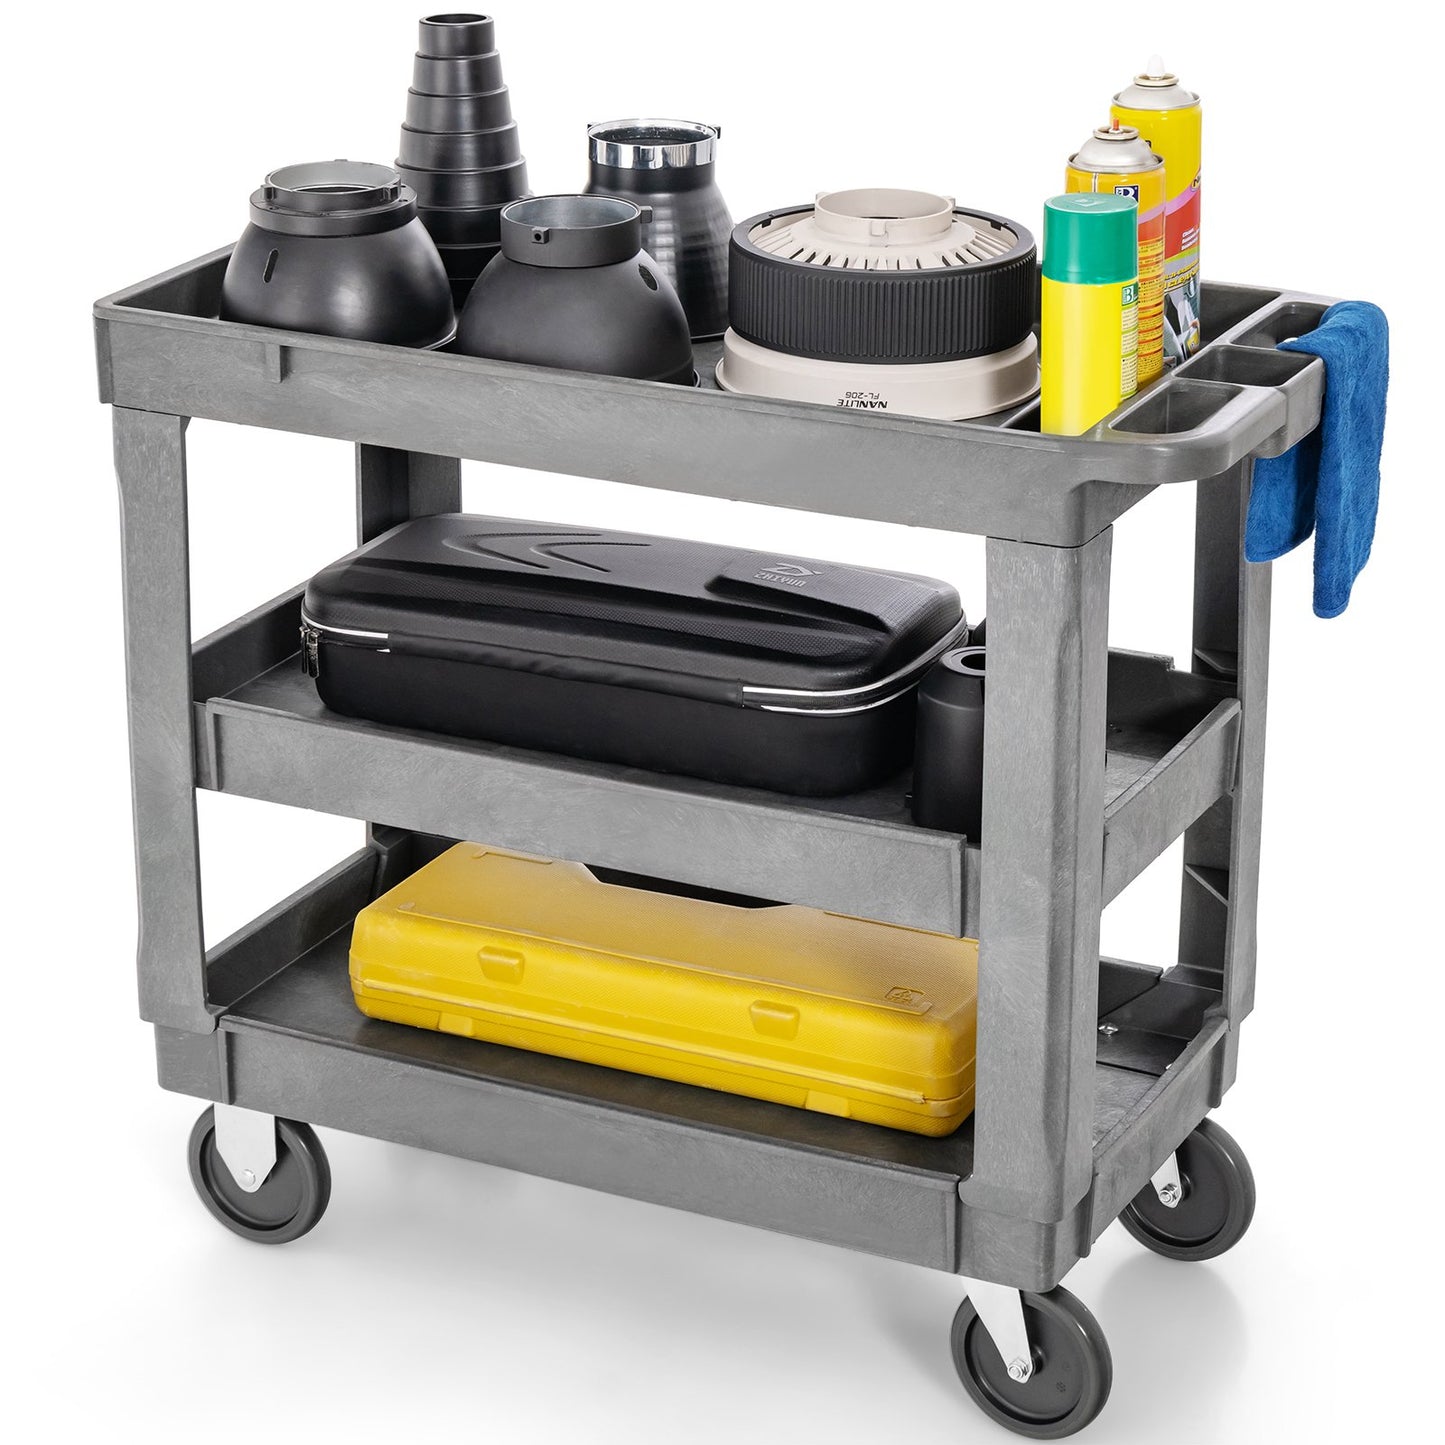 3-Tier Utility Cart with 550 LBS Max Load and Adjustable Middle Shelf, Gray